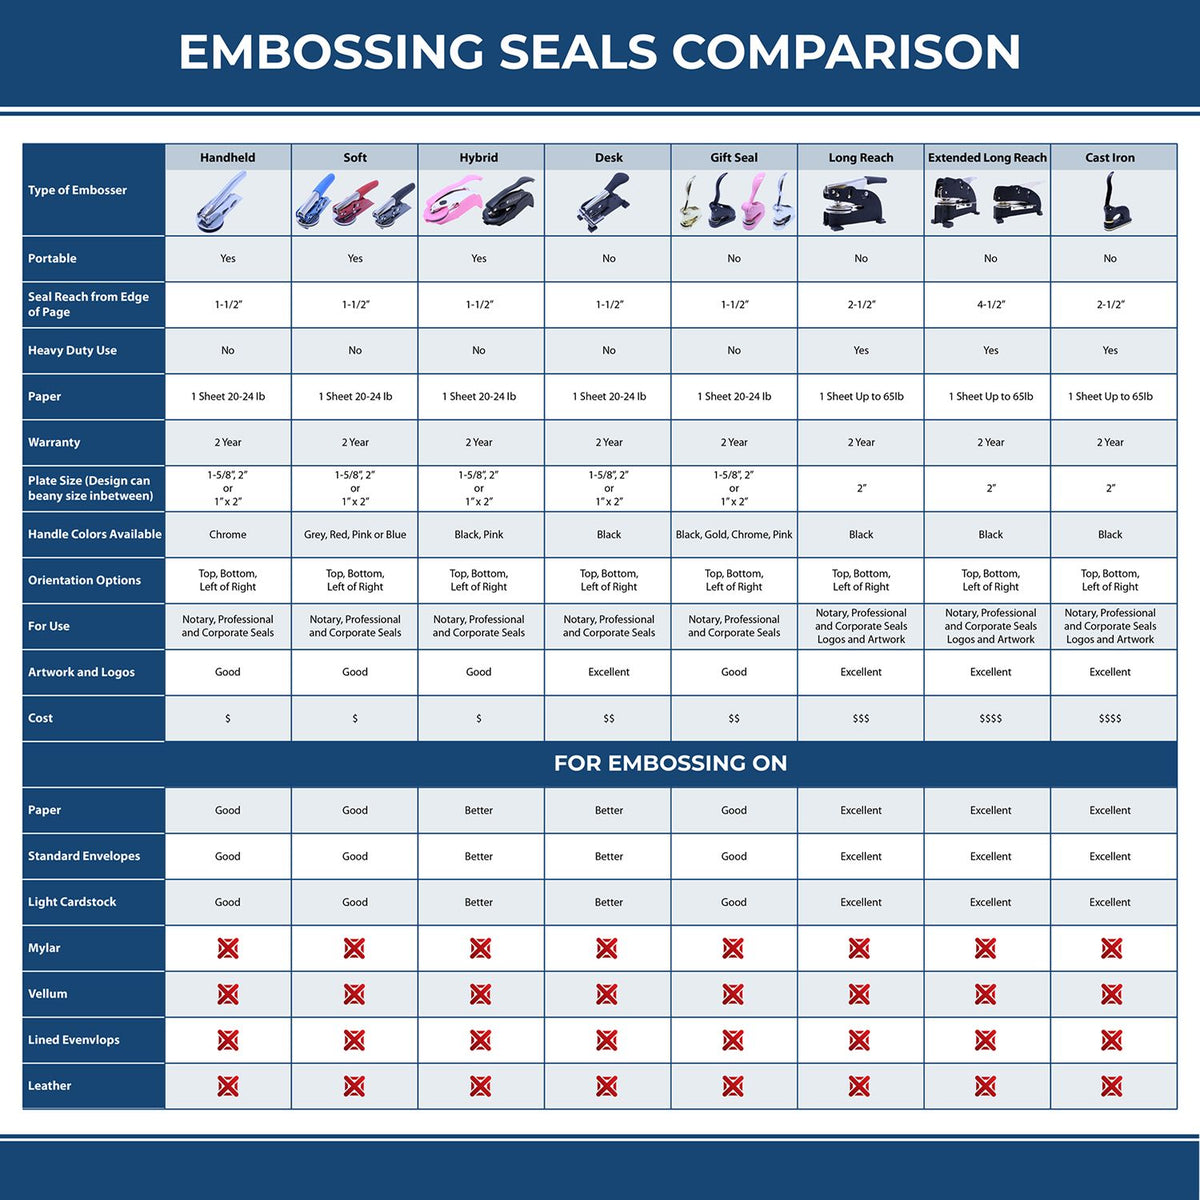 A comparison chart for the different types of mount models available for the State of Pennsylvania Extended Long Reach Geologist Seal